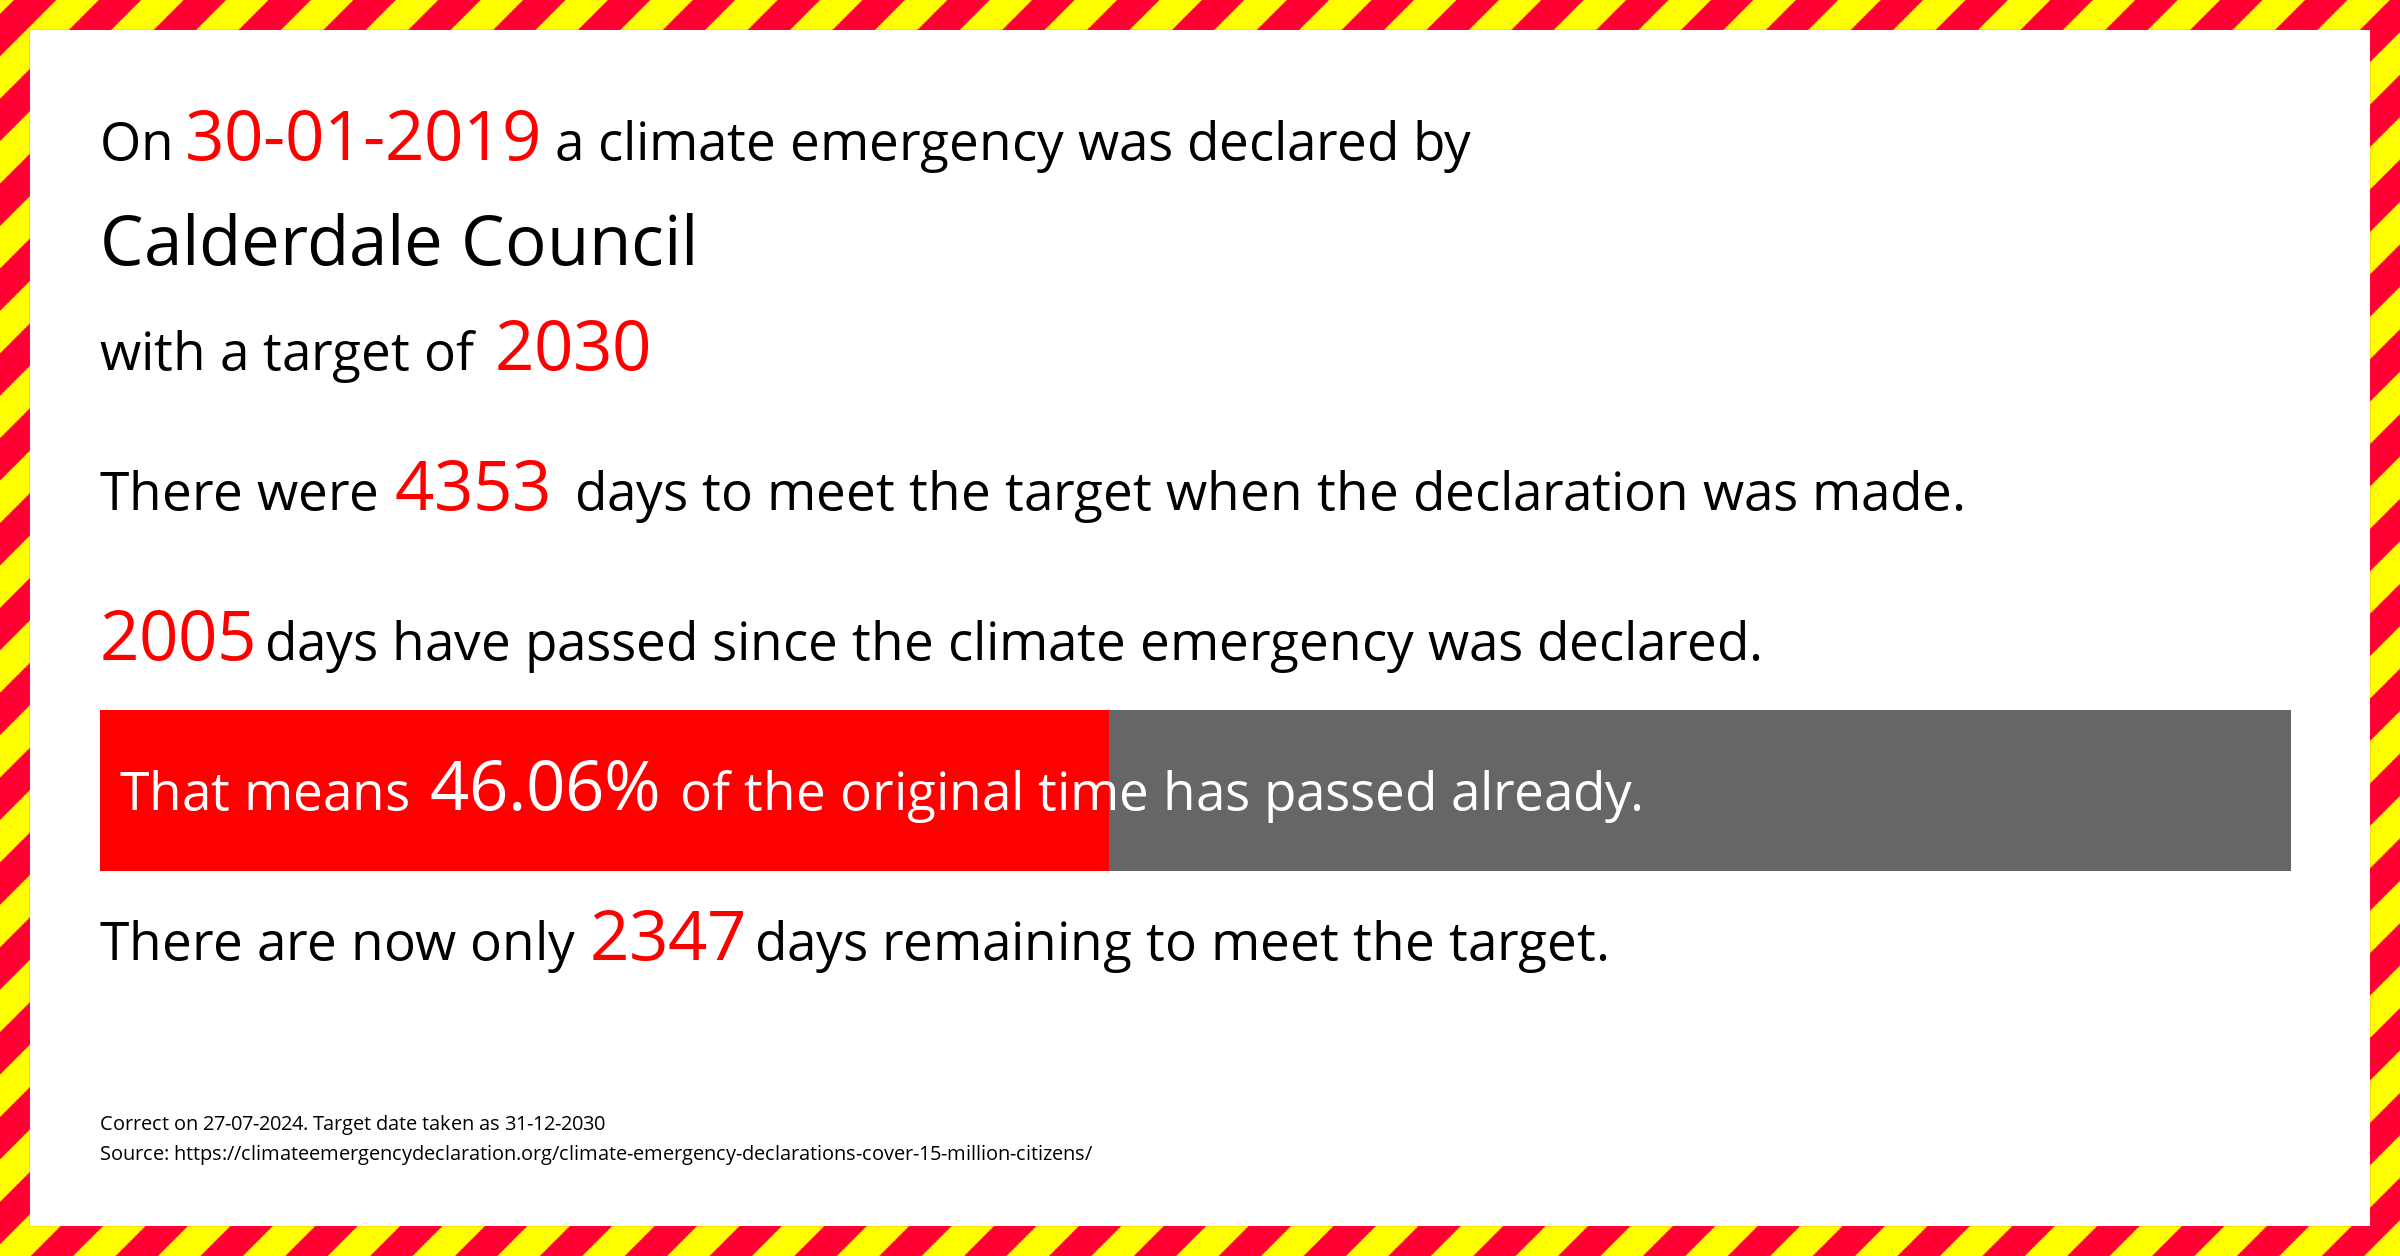 Calderdale Council declared a Climate emergency on Wednesday 30th January 2019, with a target of 2030.